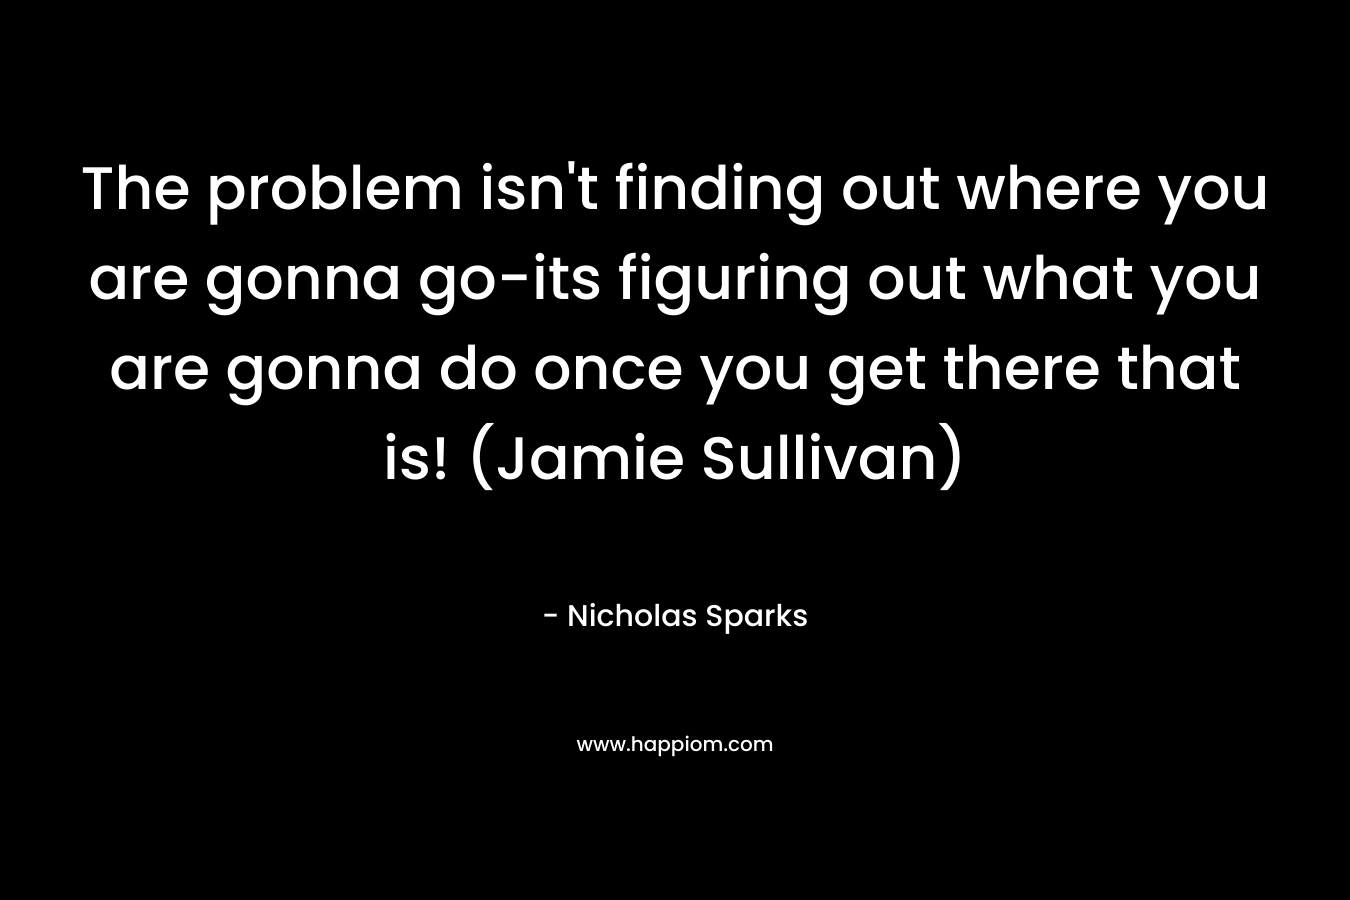 The problem isn’t finding out where you are gonna go-its figuring out what you are gonna do once you get there that is! (Jamie Sullivan) – Nicholas Sparks